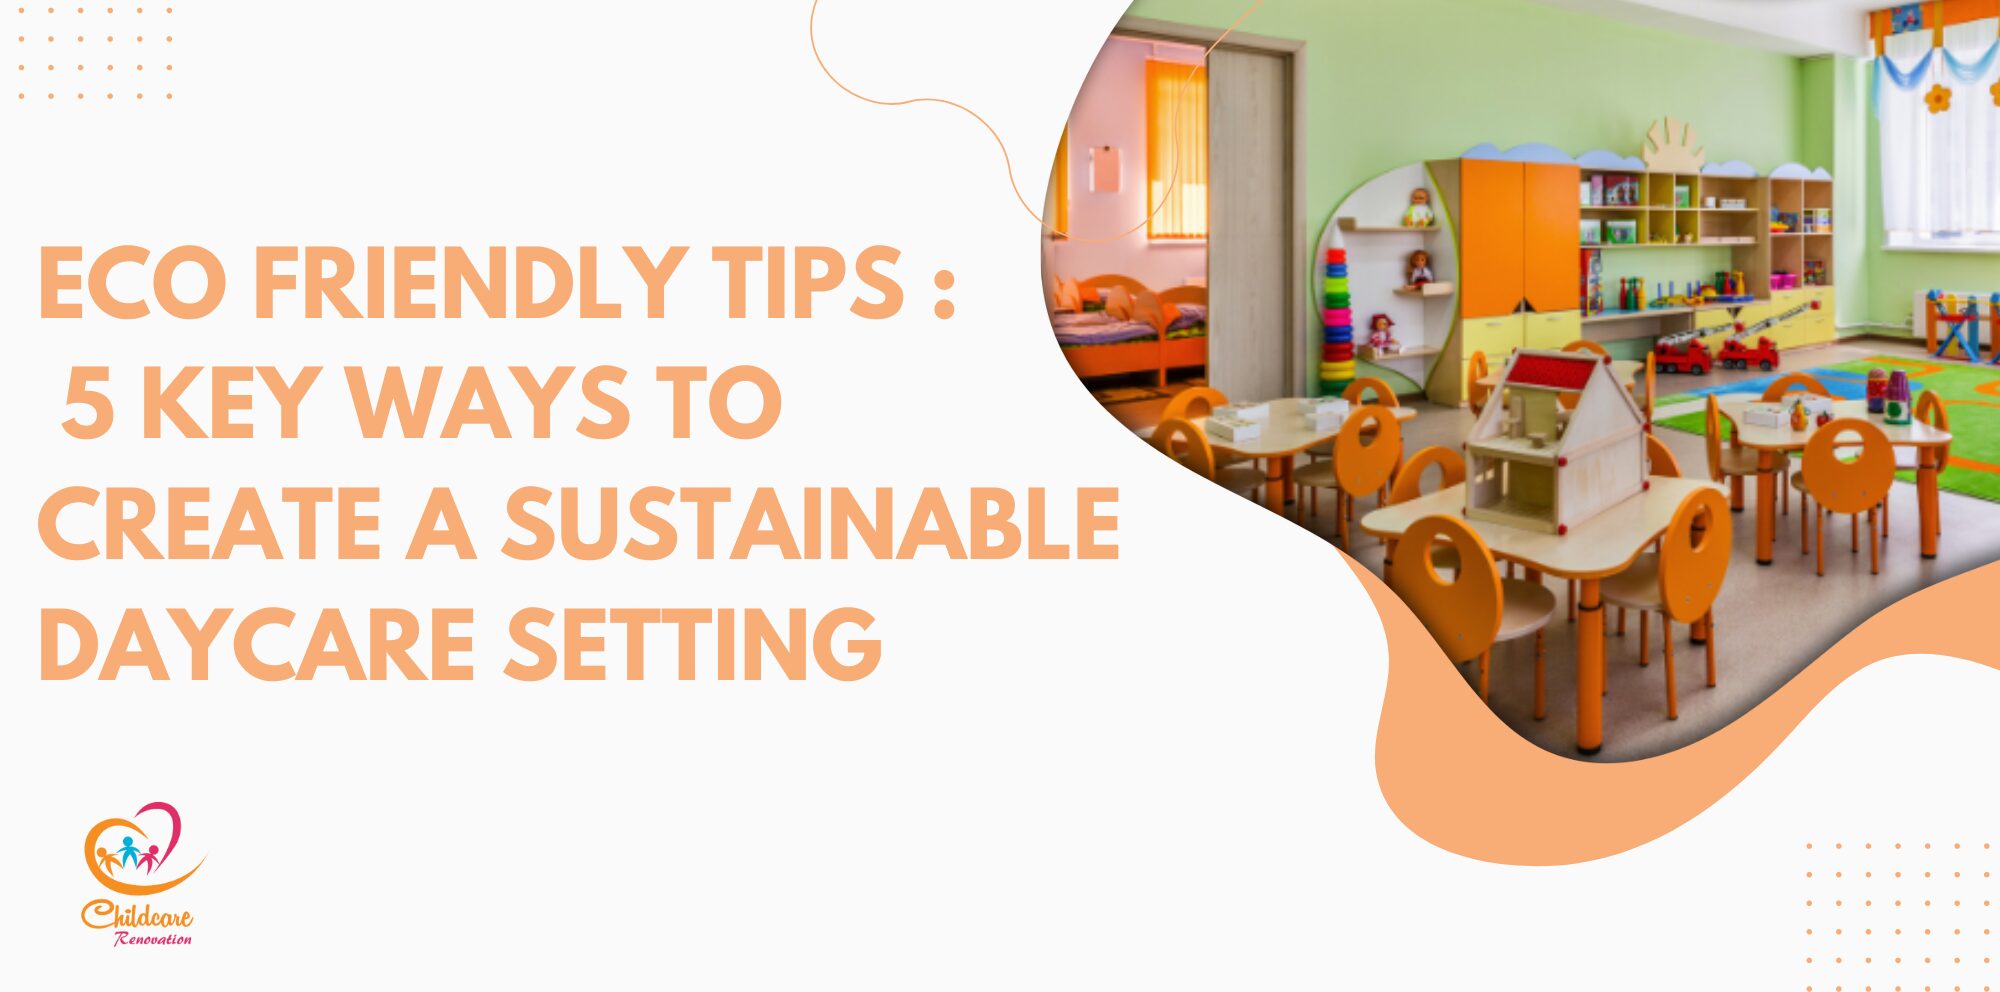 Eco Friendly Tips : 5 Key Ways to Create a Sustainable Daycare Setting